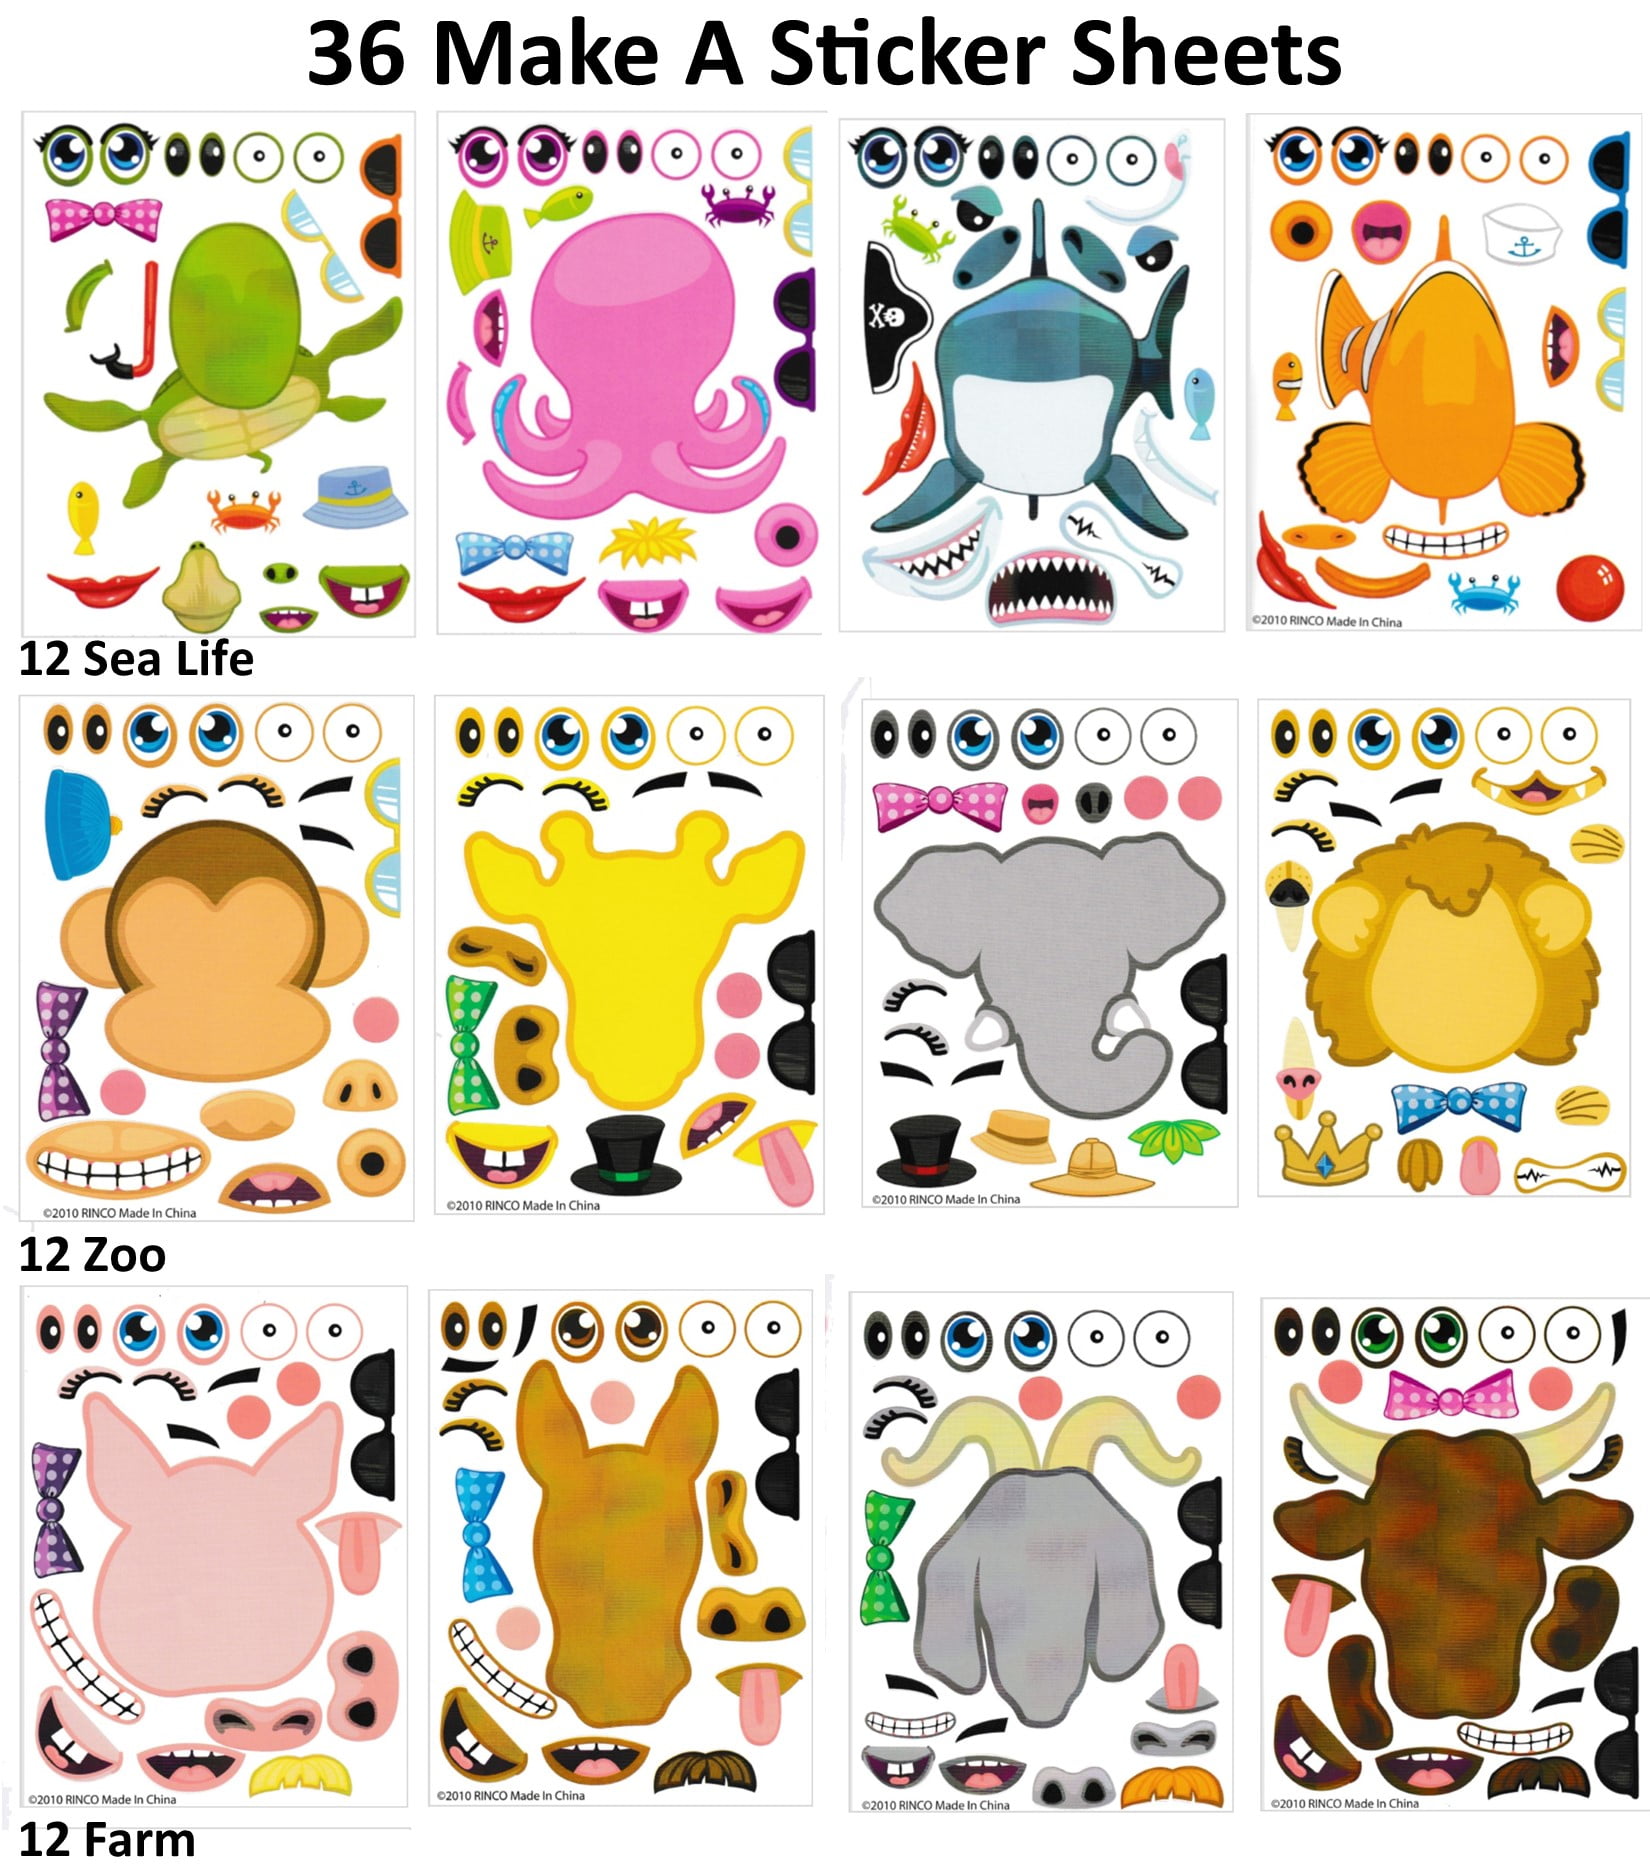 FUN 10 SHEETS OF ZOO ANIMAL STICKERS CHILDRENS PARTY BAG FILLER 